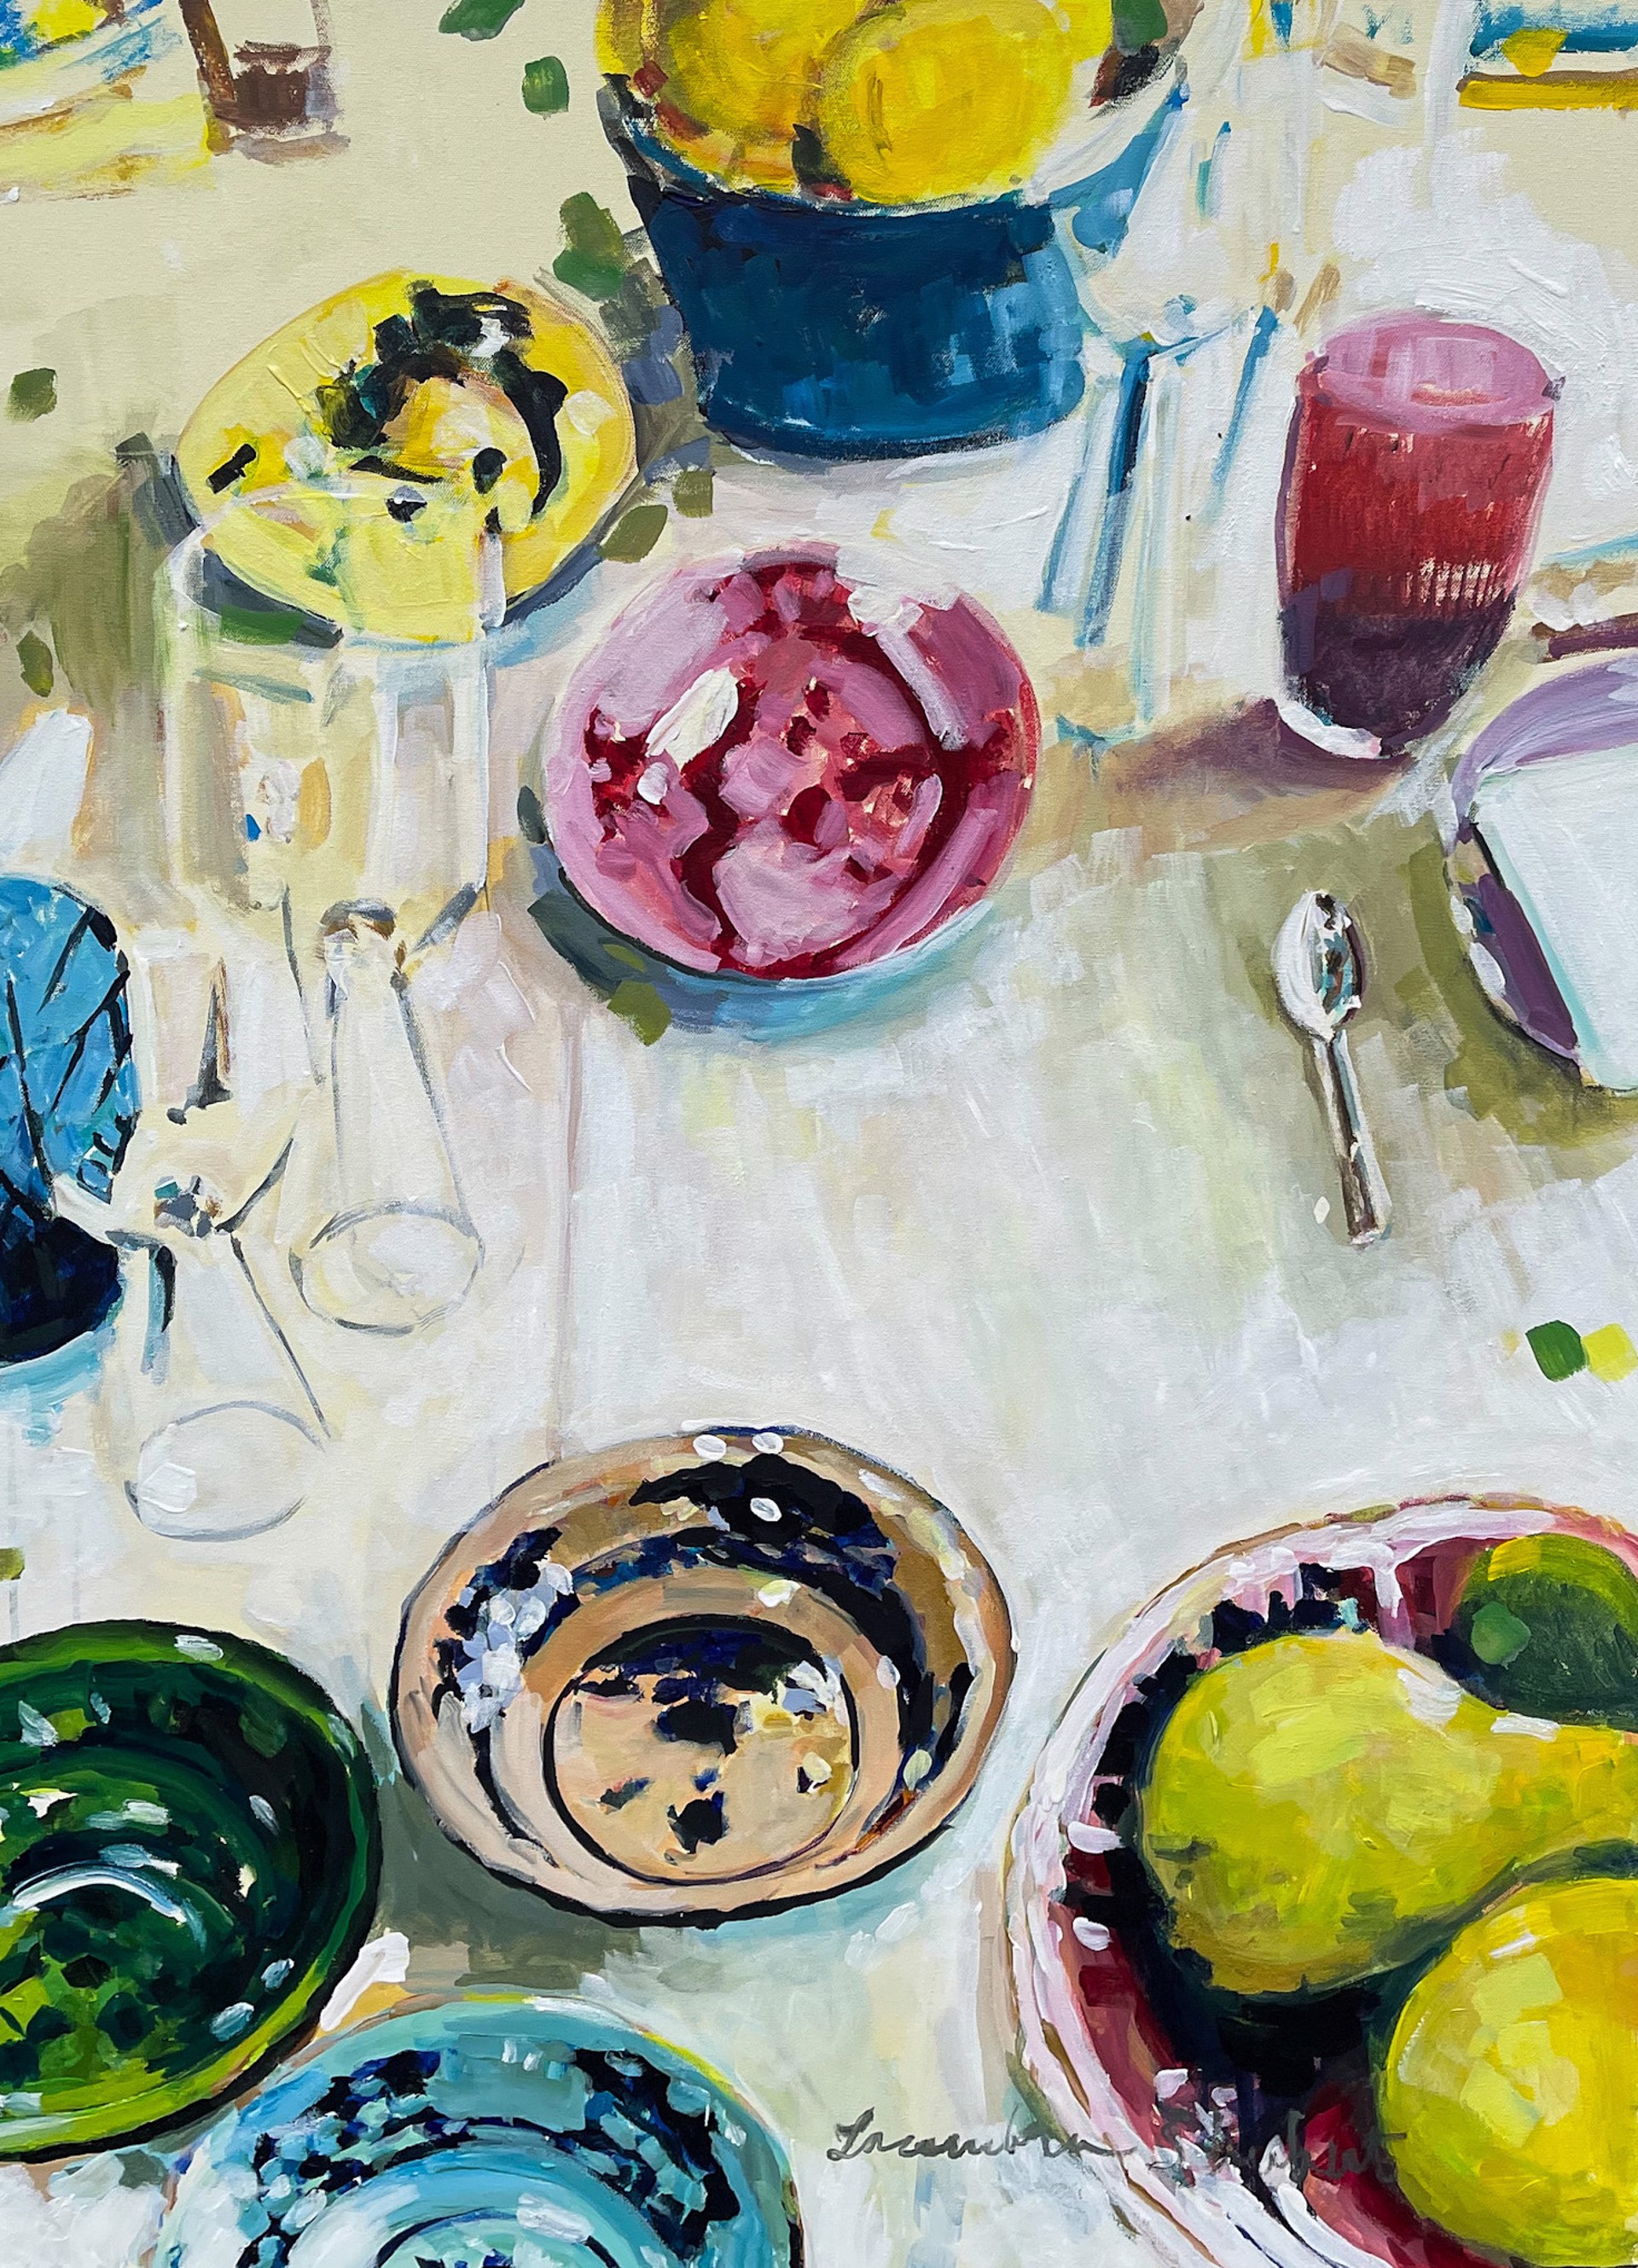 Colorful Plates and Fruit by Laura Lacambra Shubert